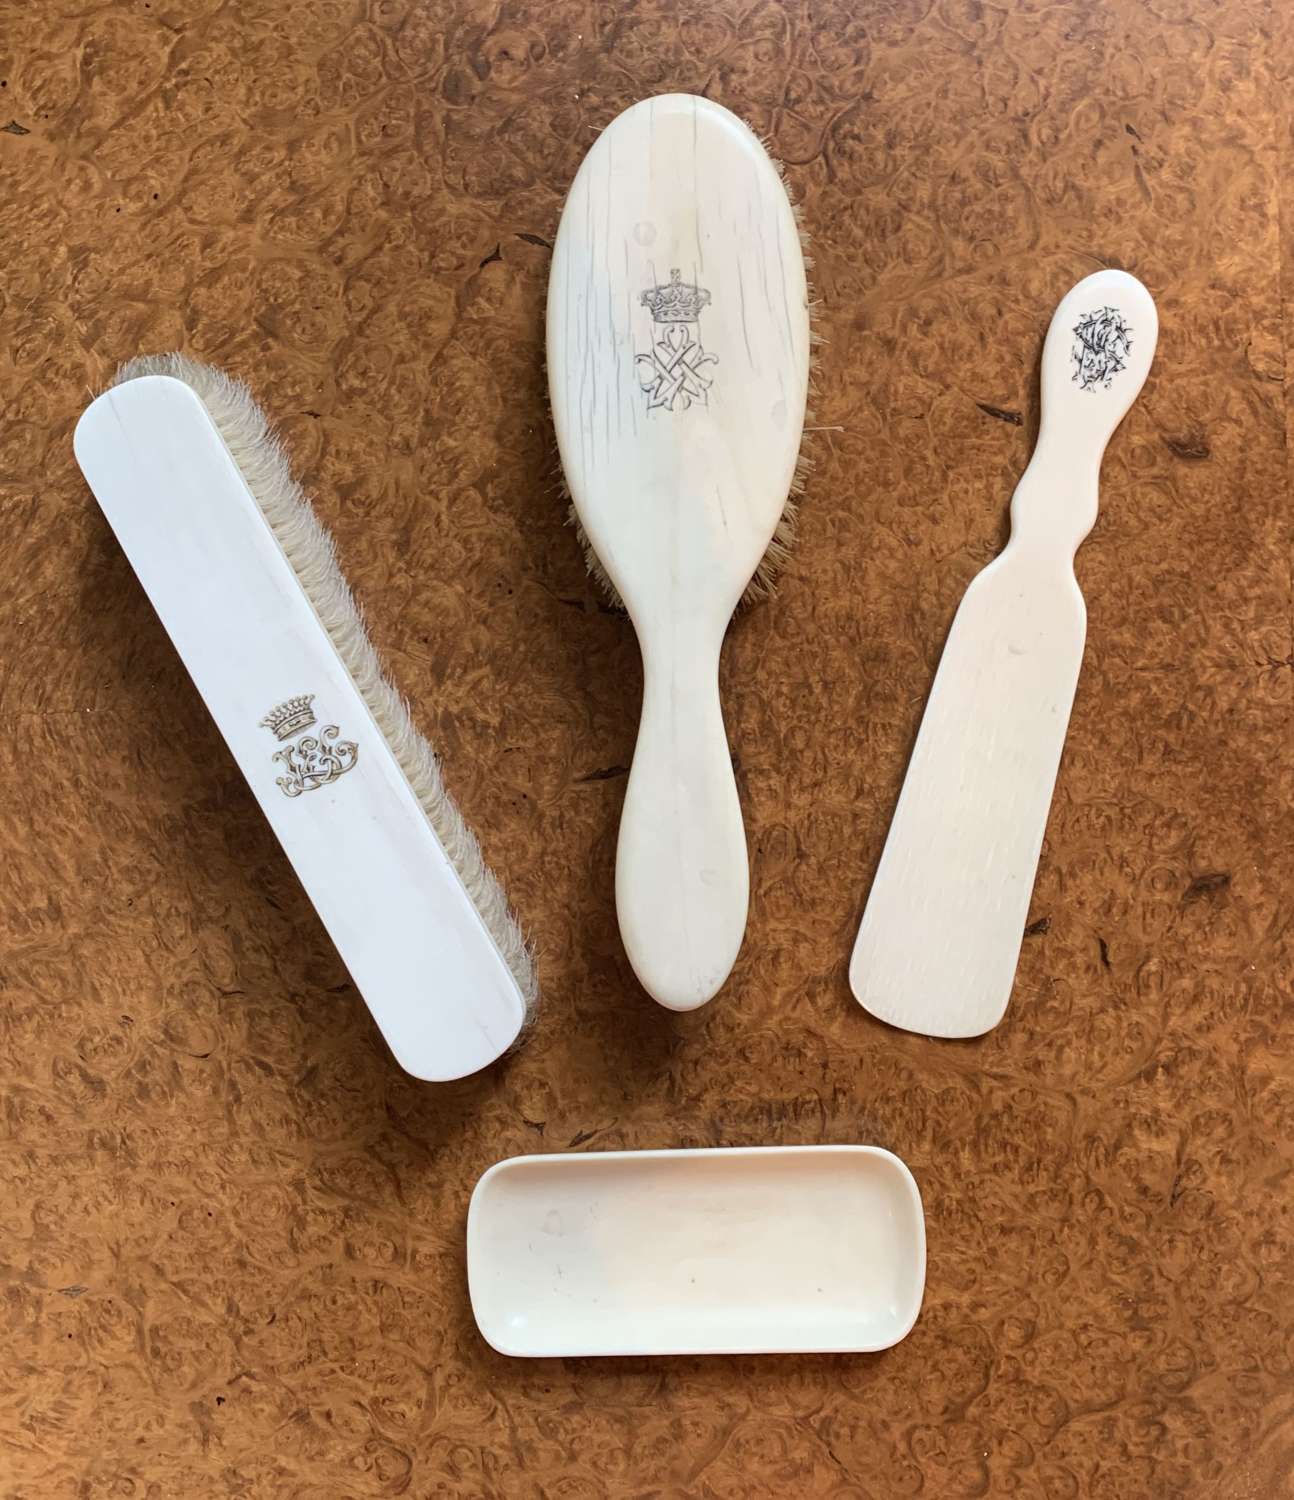 An Ivory Hairbrush with Royal Monogram and Various Others